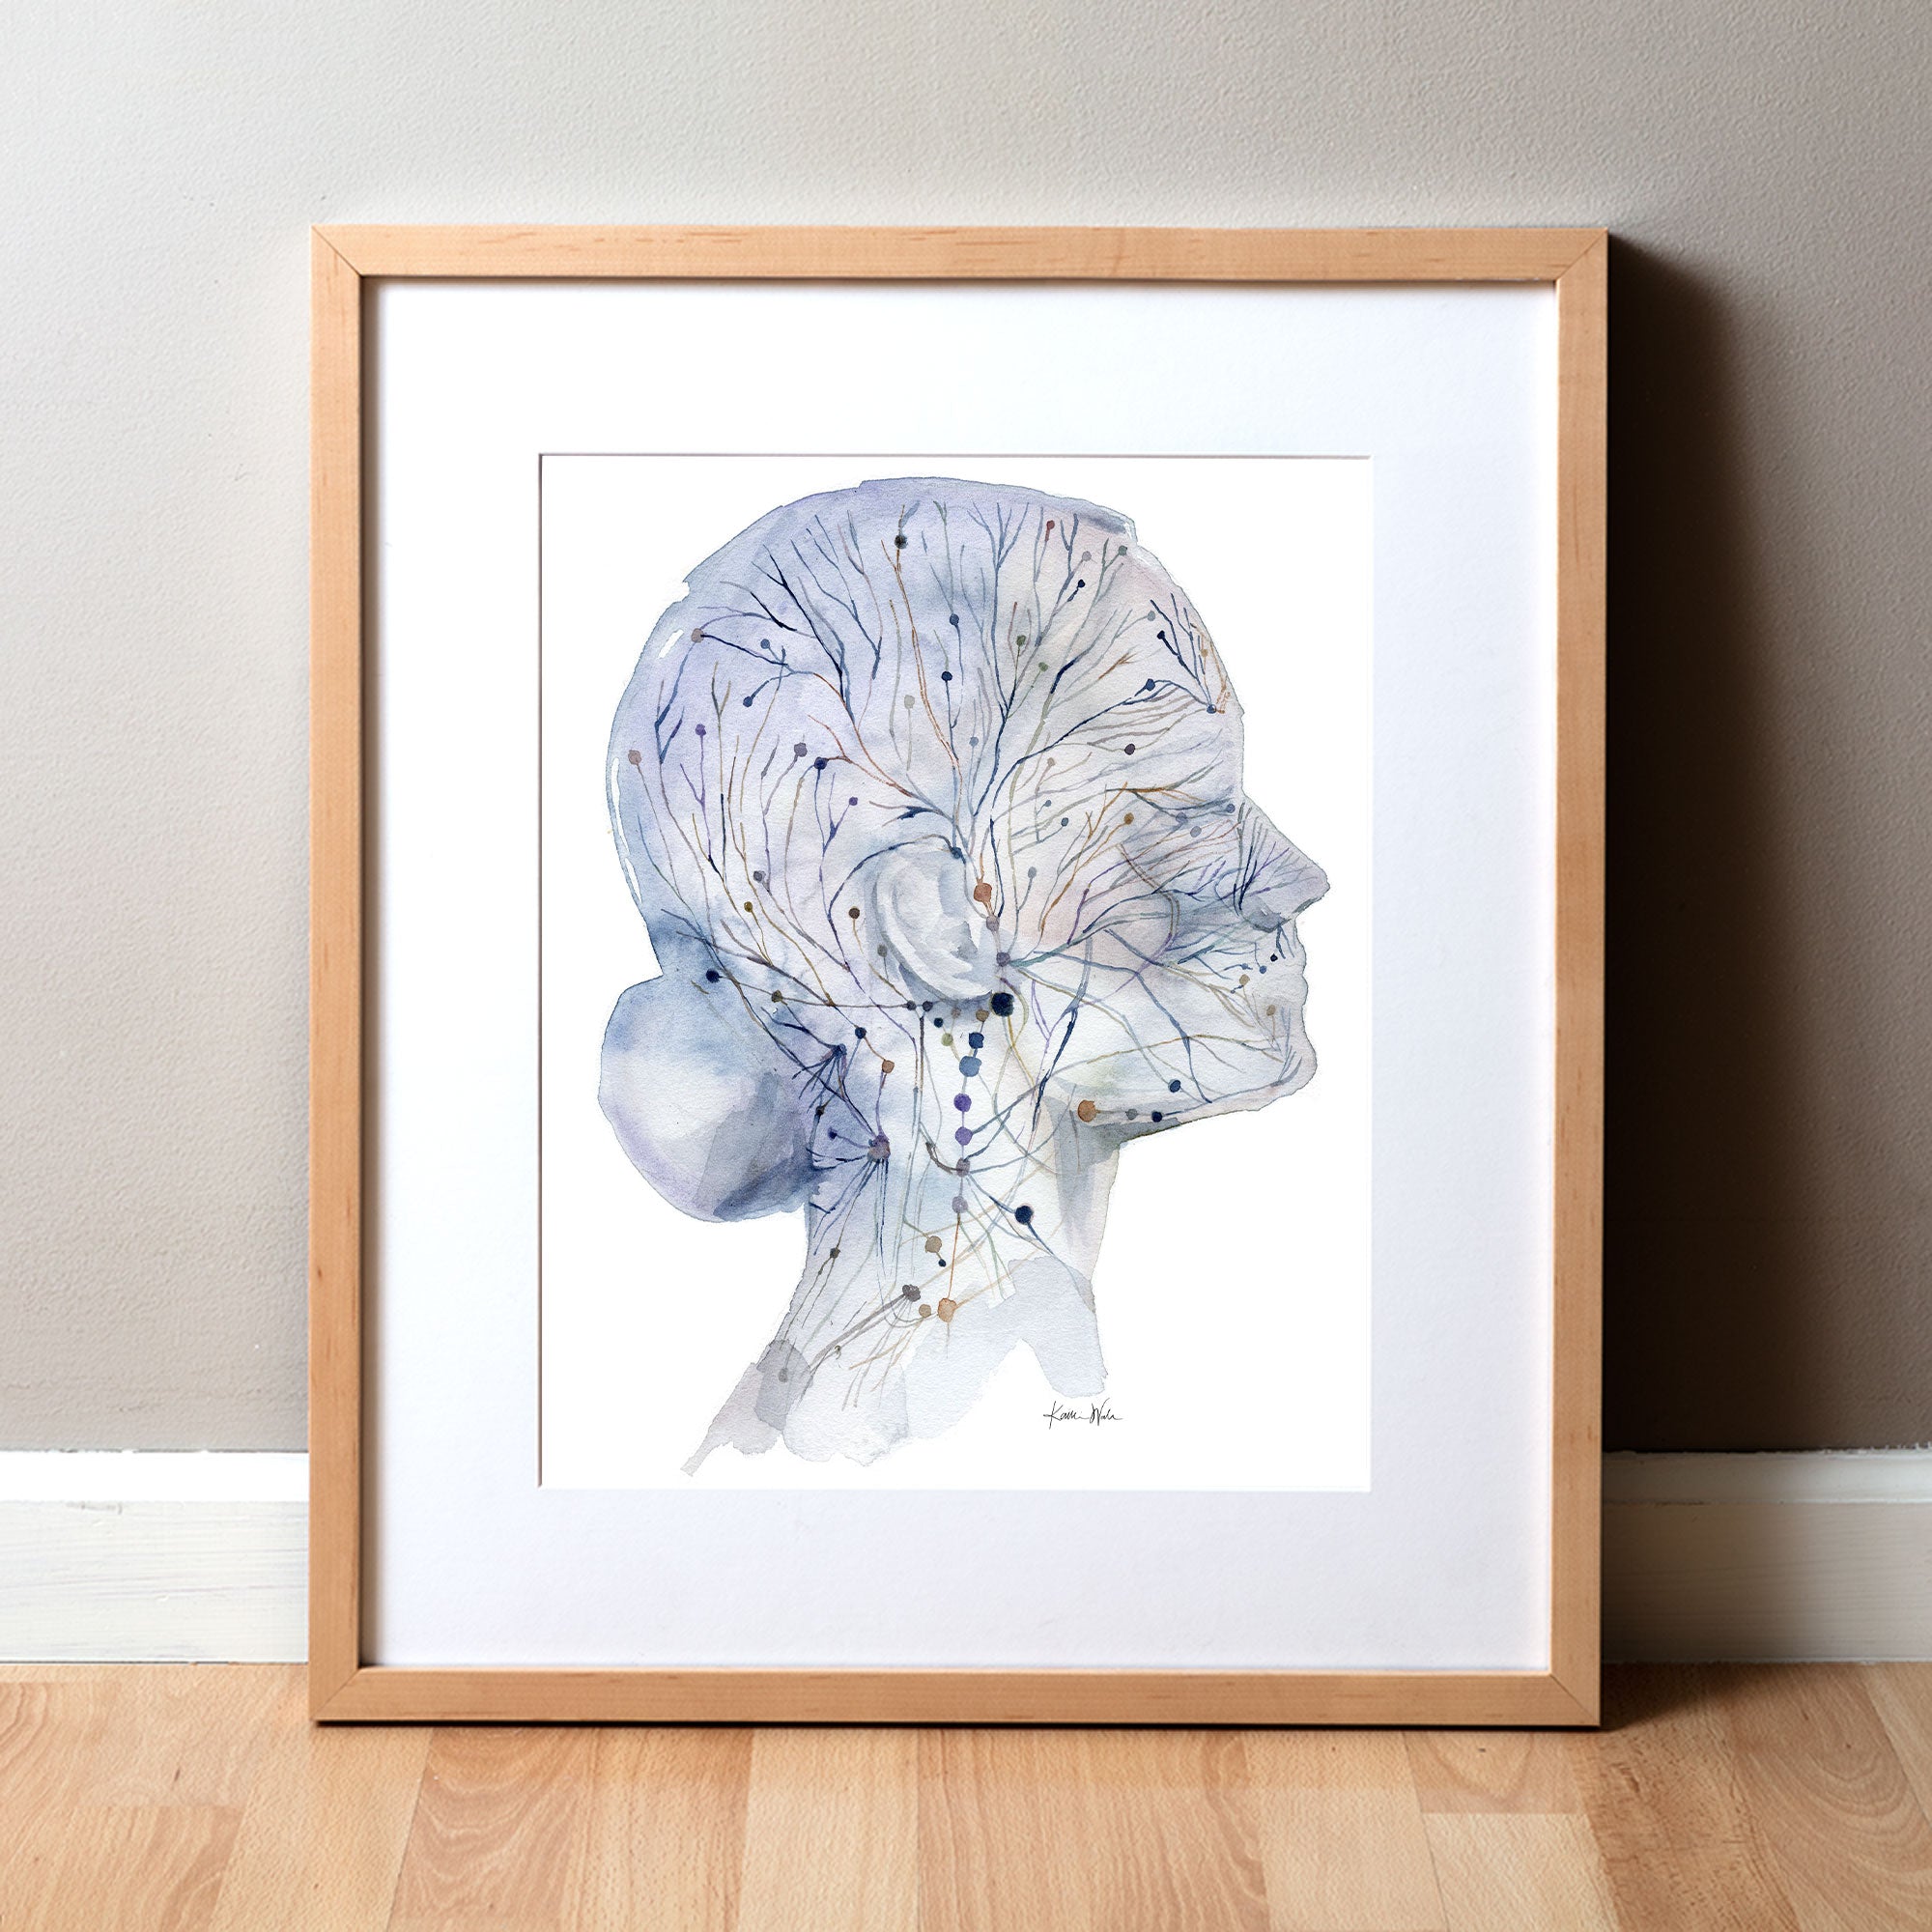 Framed watercolor painting of a head and neck showing the lymphatic system.